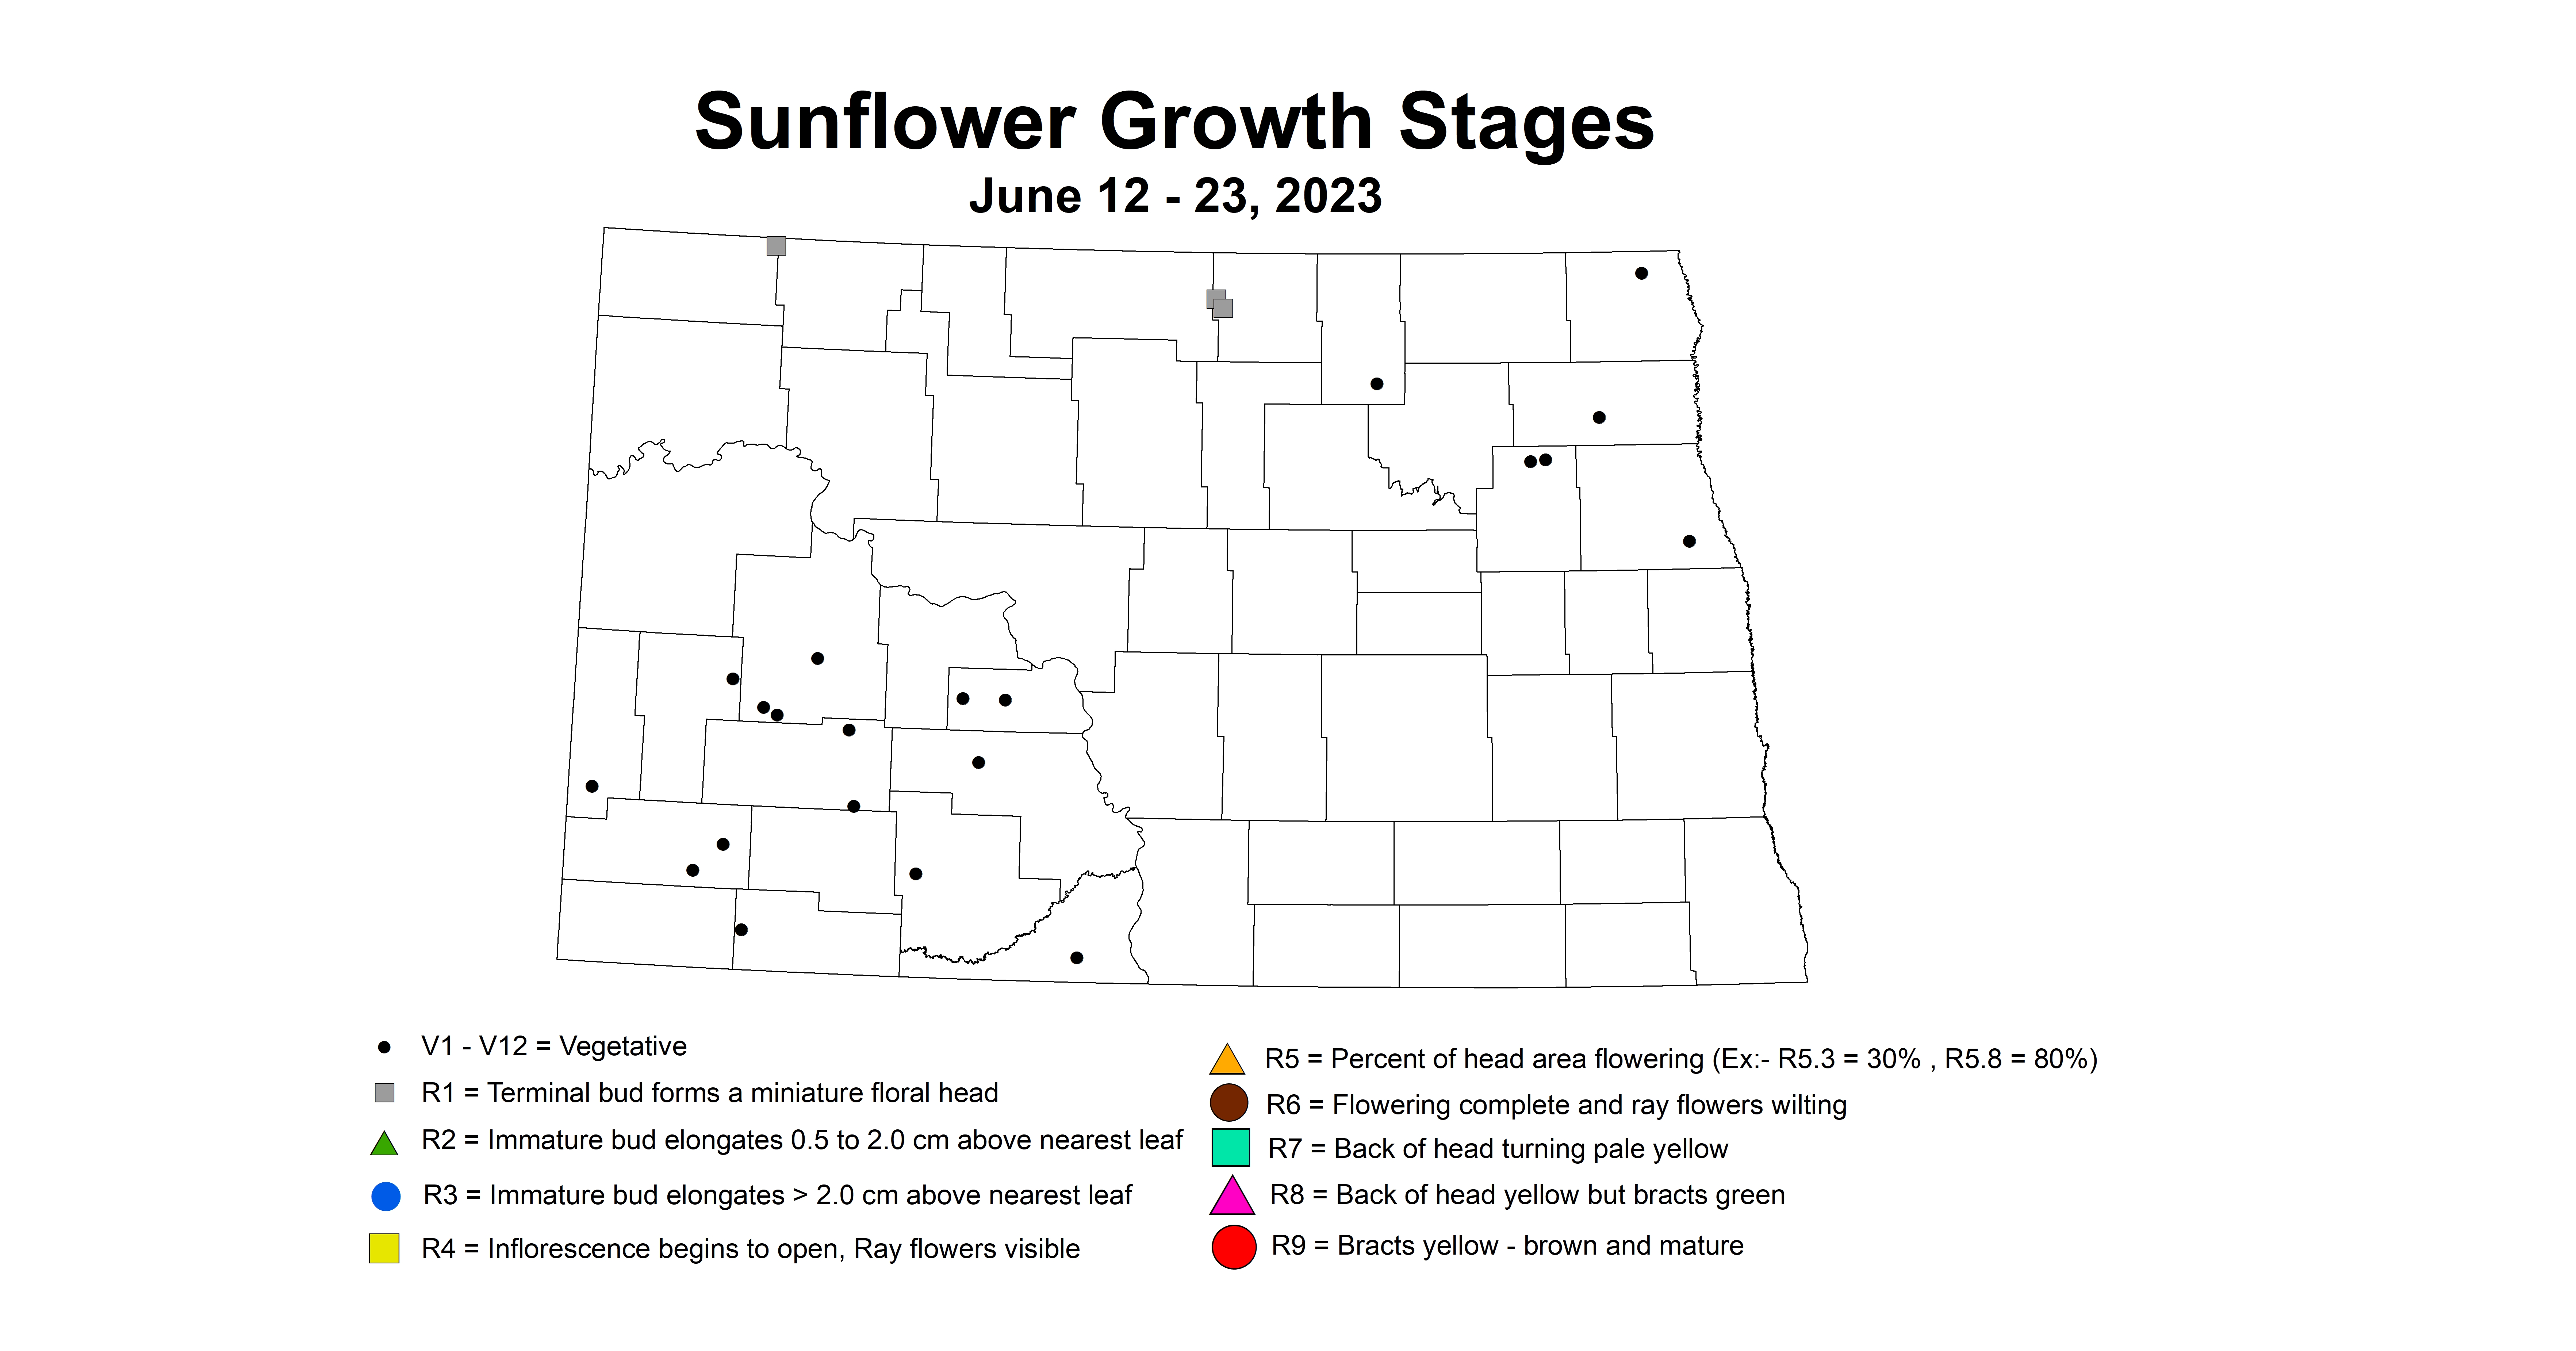 sunflower growth stages June 12-23 2023